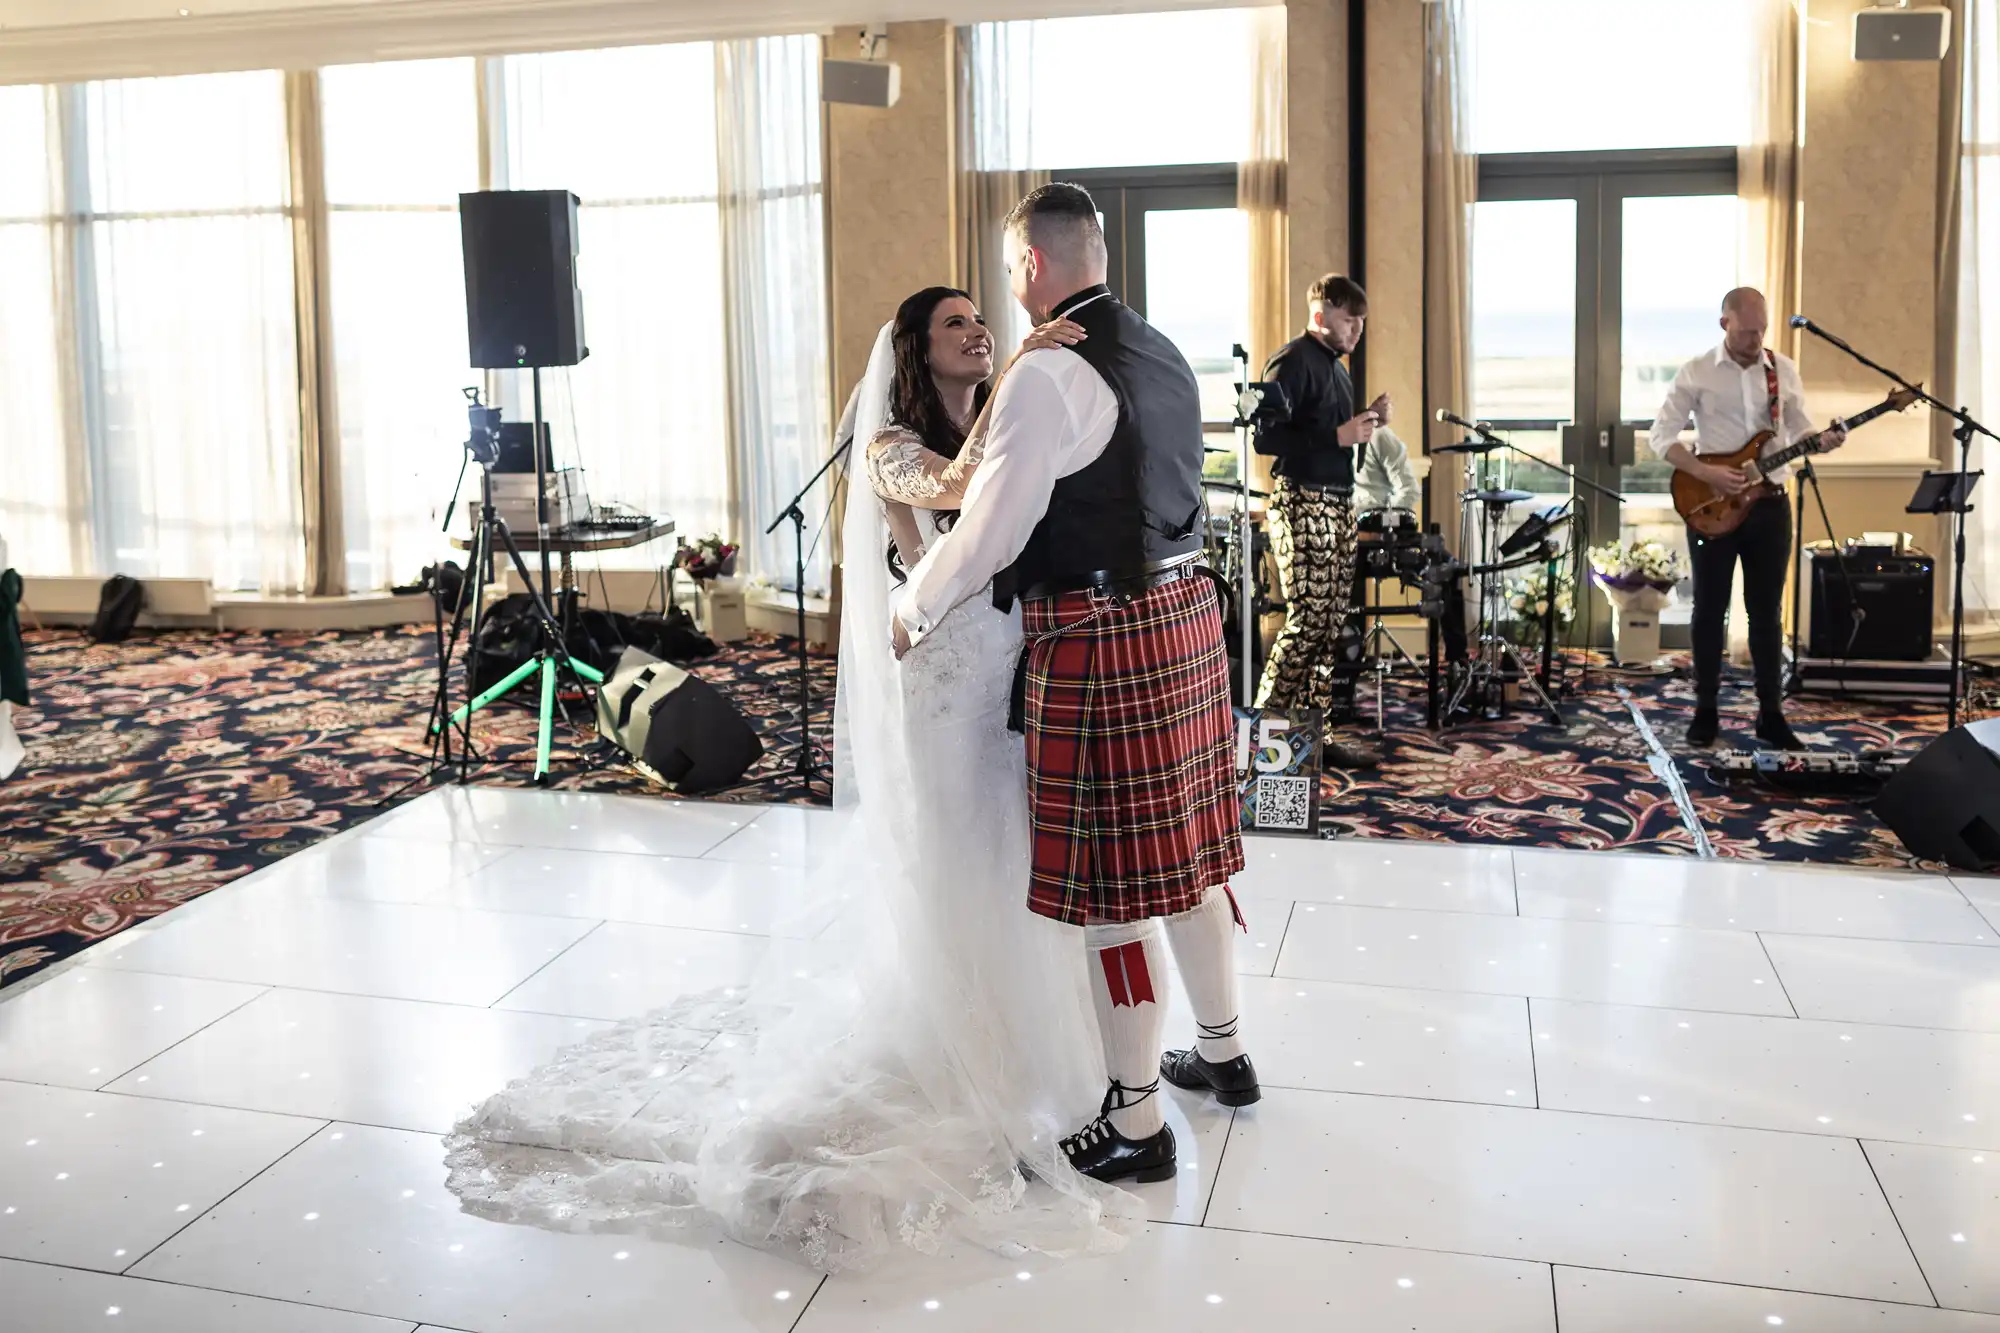 Bride in a white gown and groom in a kilt share a dance at a wedding reception, with a live band performing in the background.